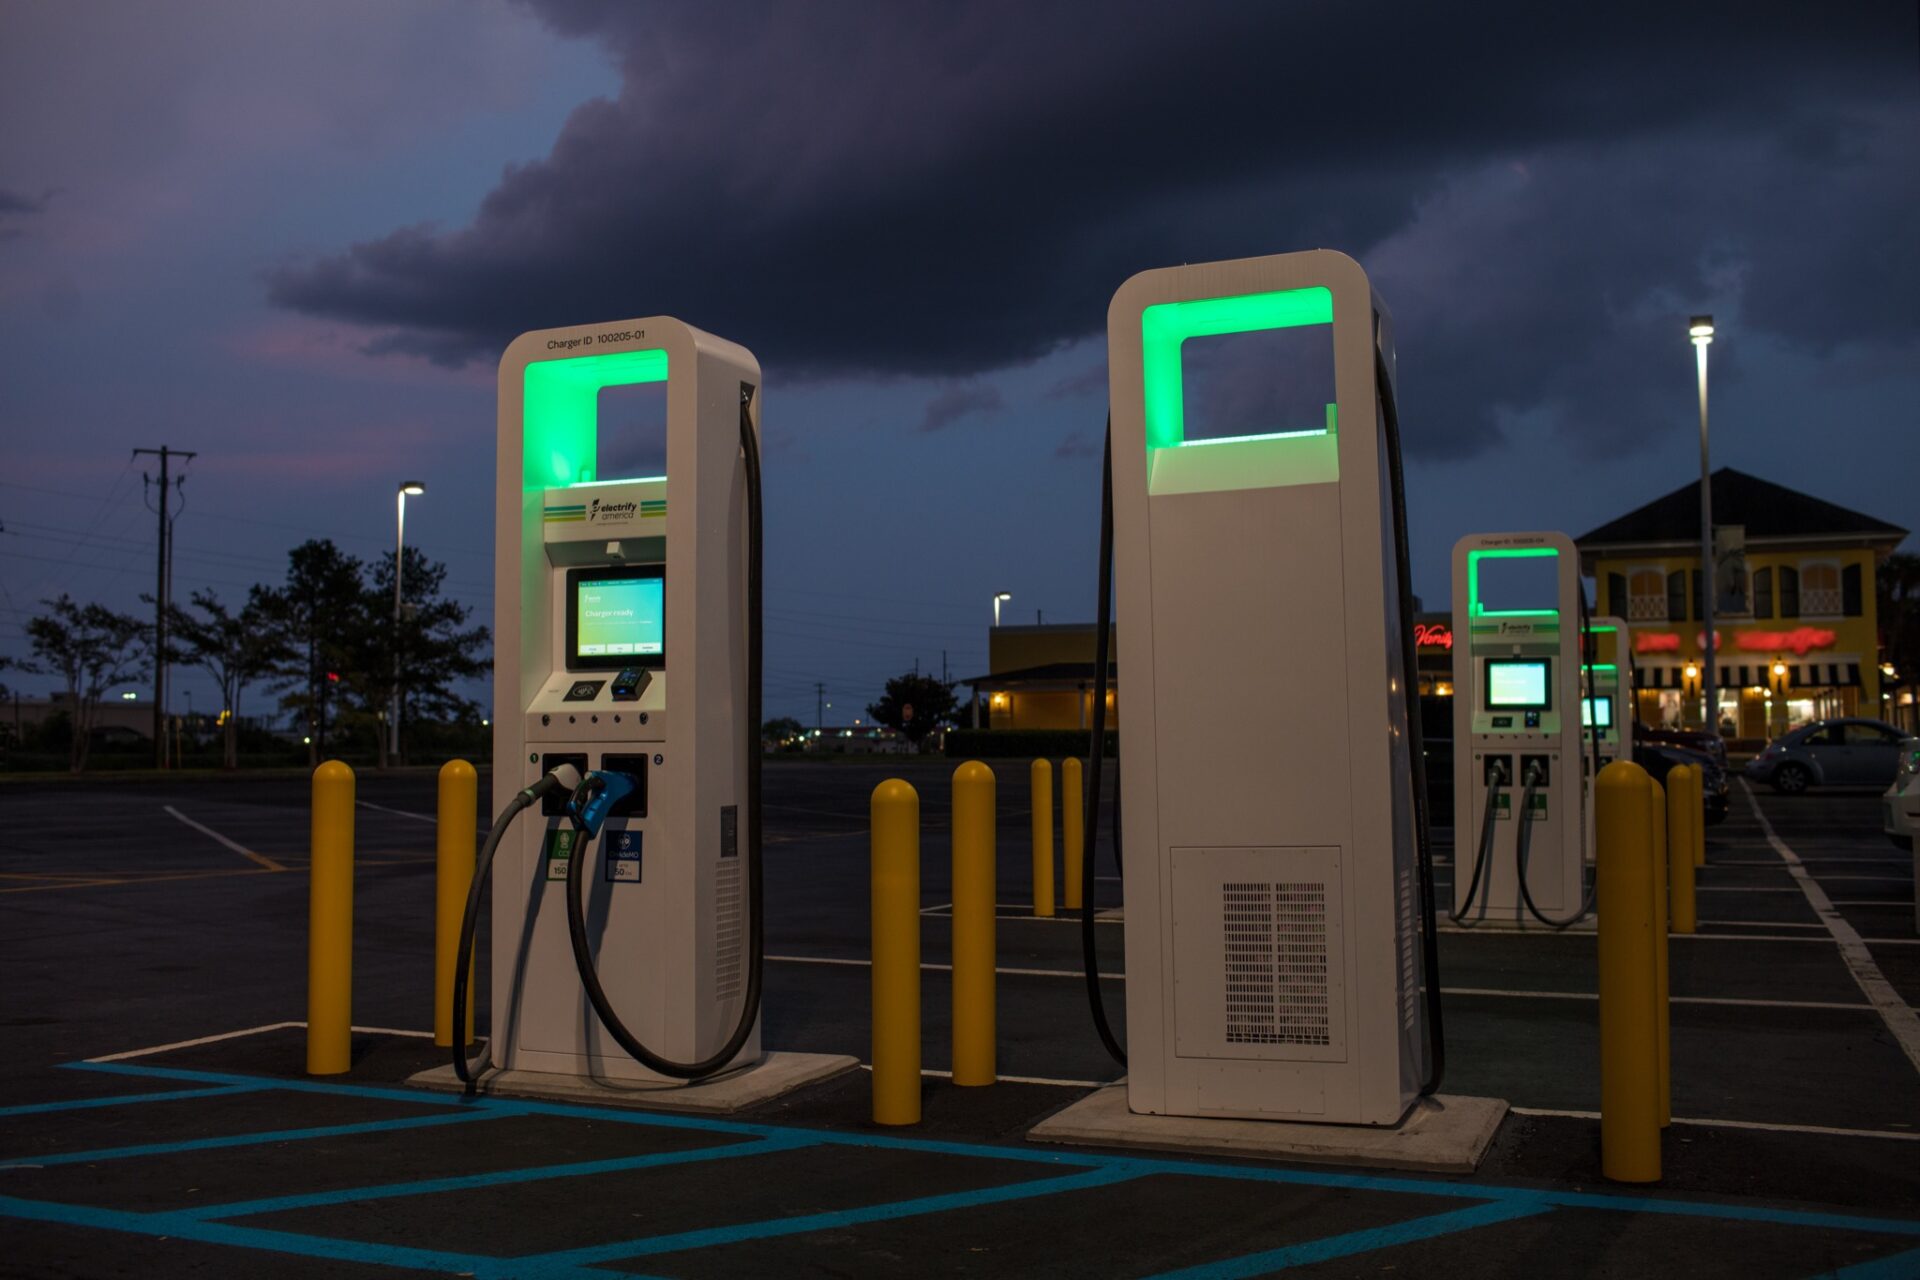 EV DC Fast Charger Market Size, Industry Analysis & Forecast